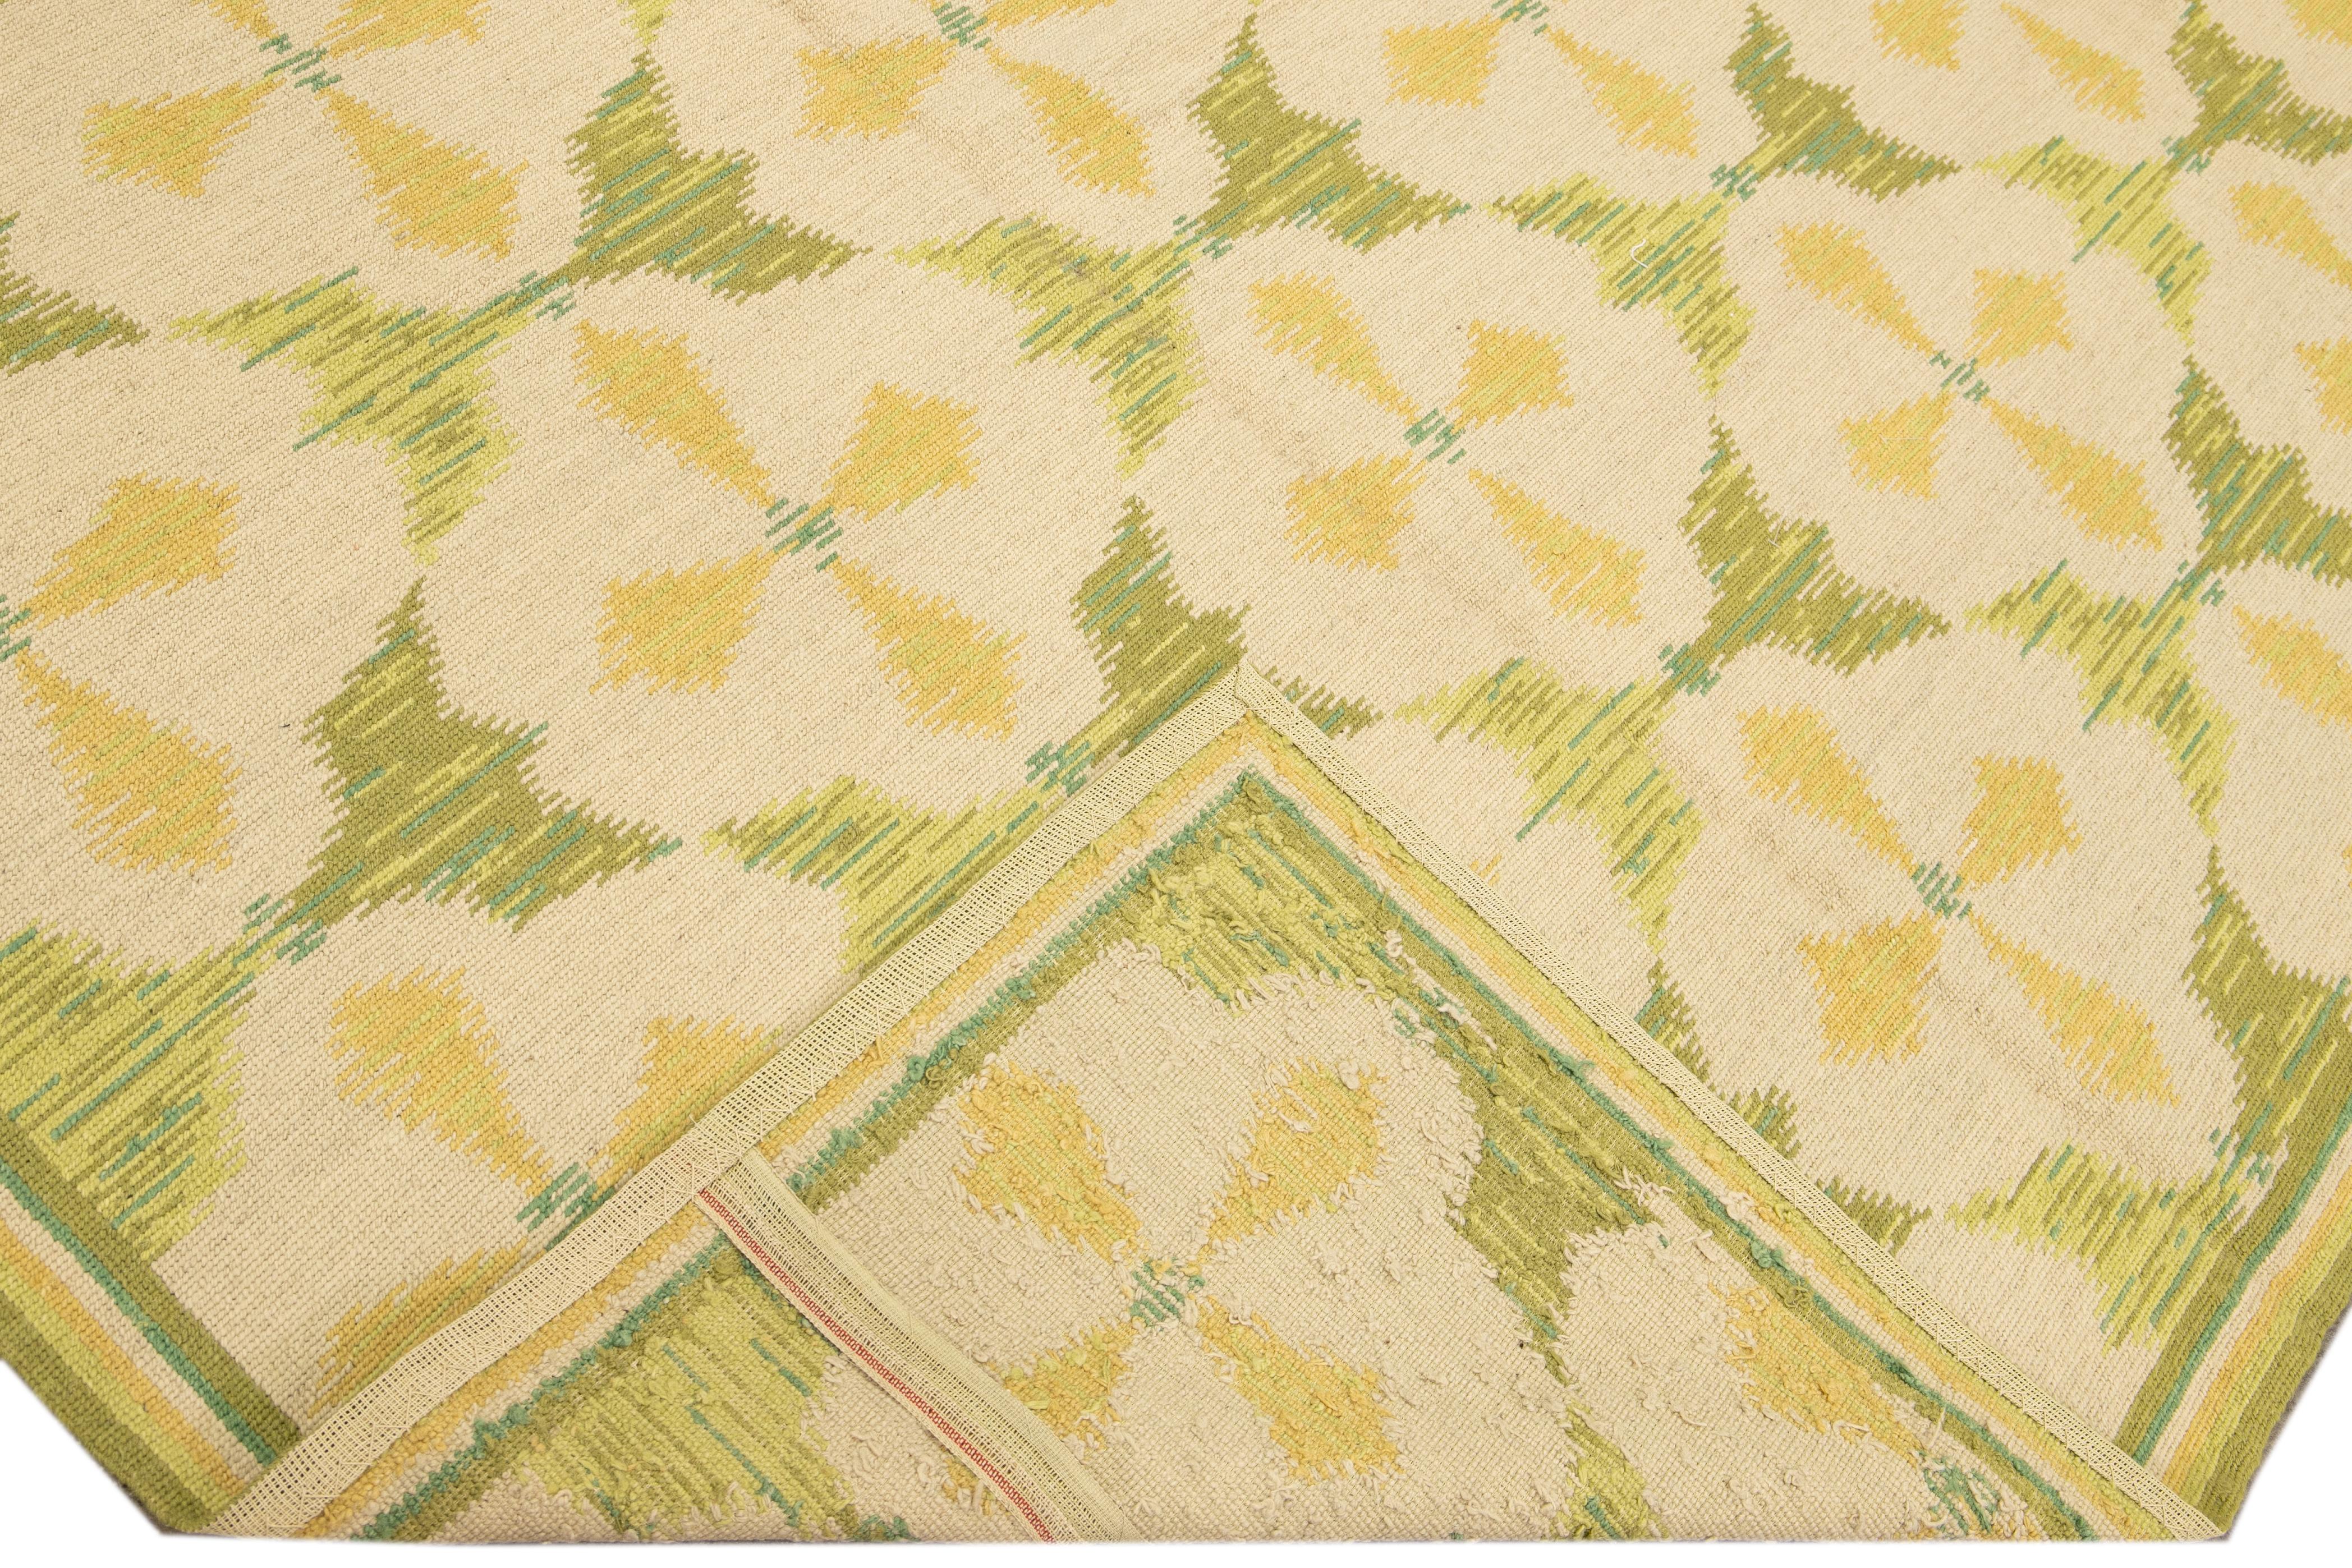 Beautiful vintage Portuguese Arraiolos needlepoint wool rug with a green field. This piece has fine details in a beige and yellow layout on a gorgeous floral pattern design. 

This rug measures: 8'11